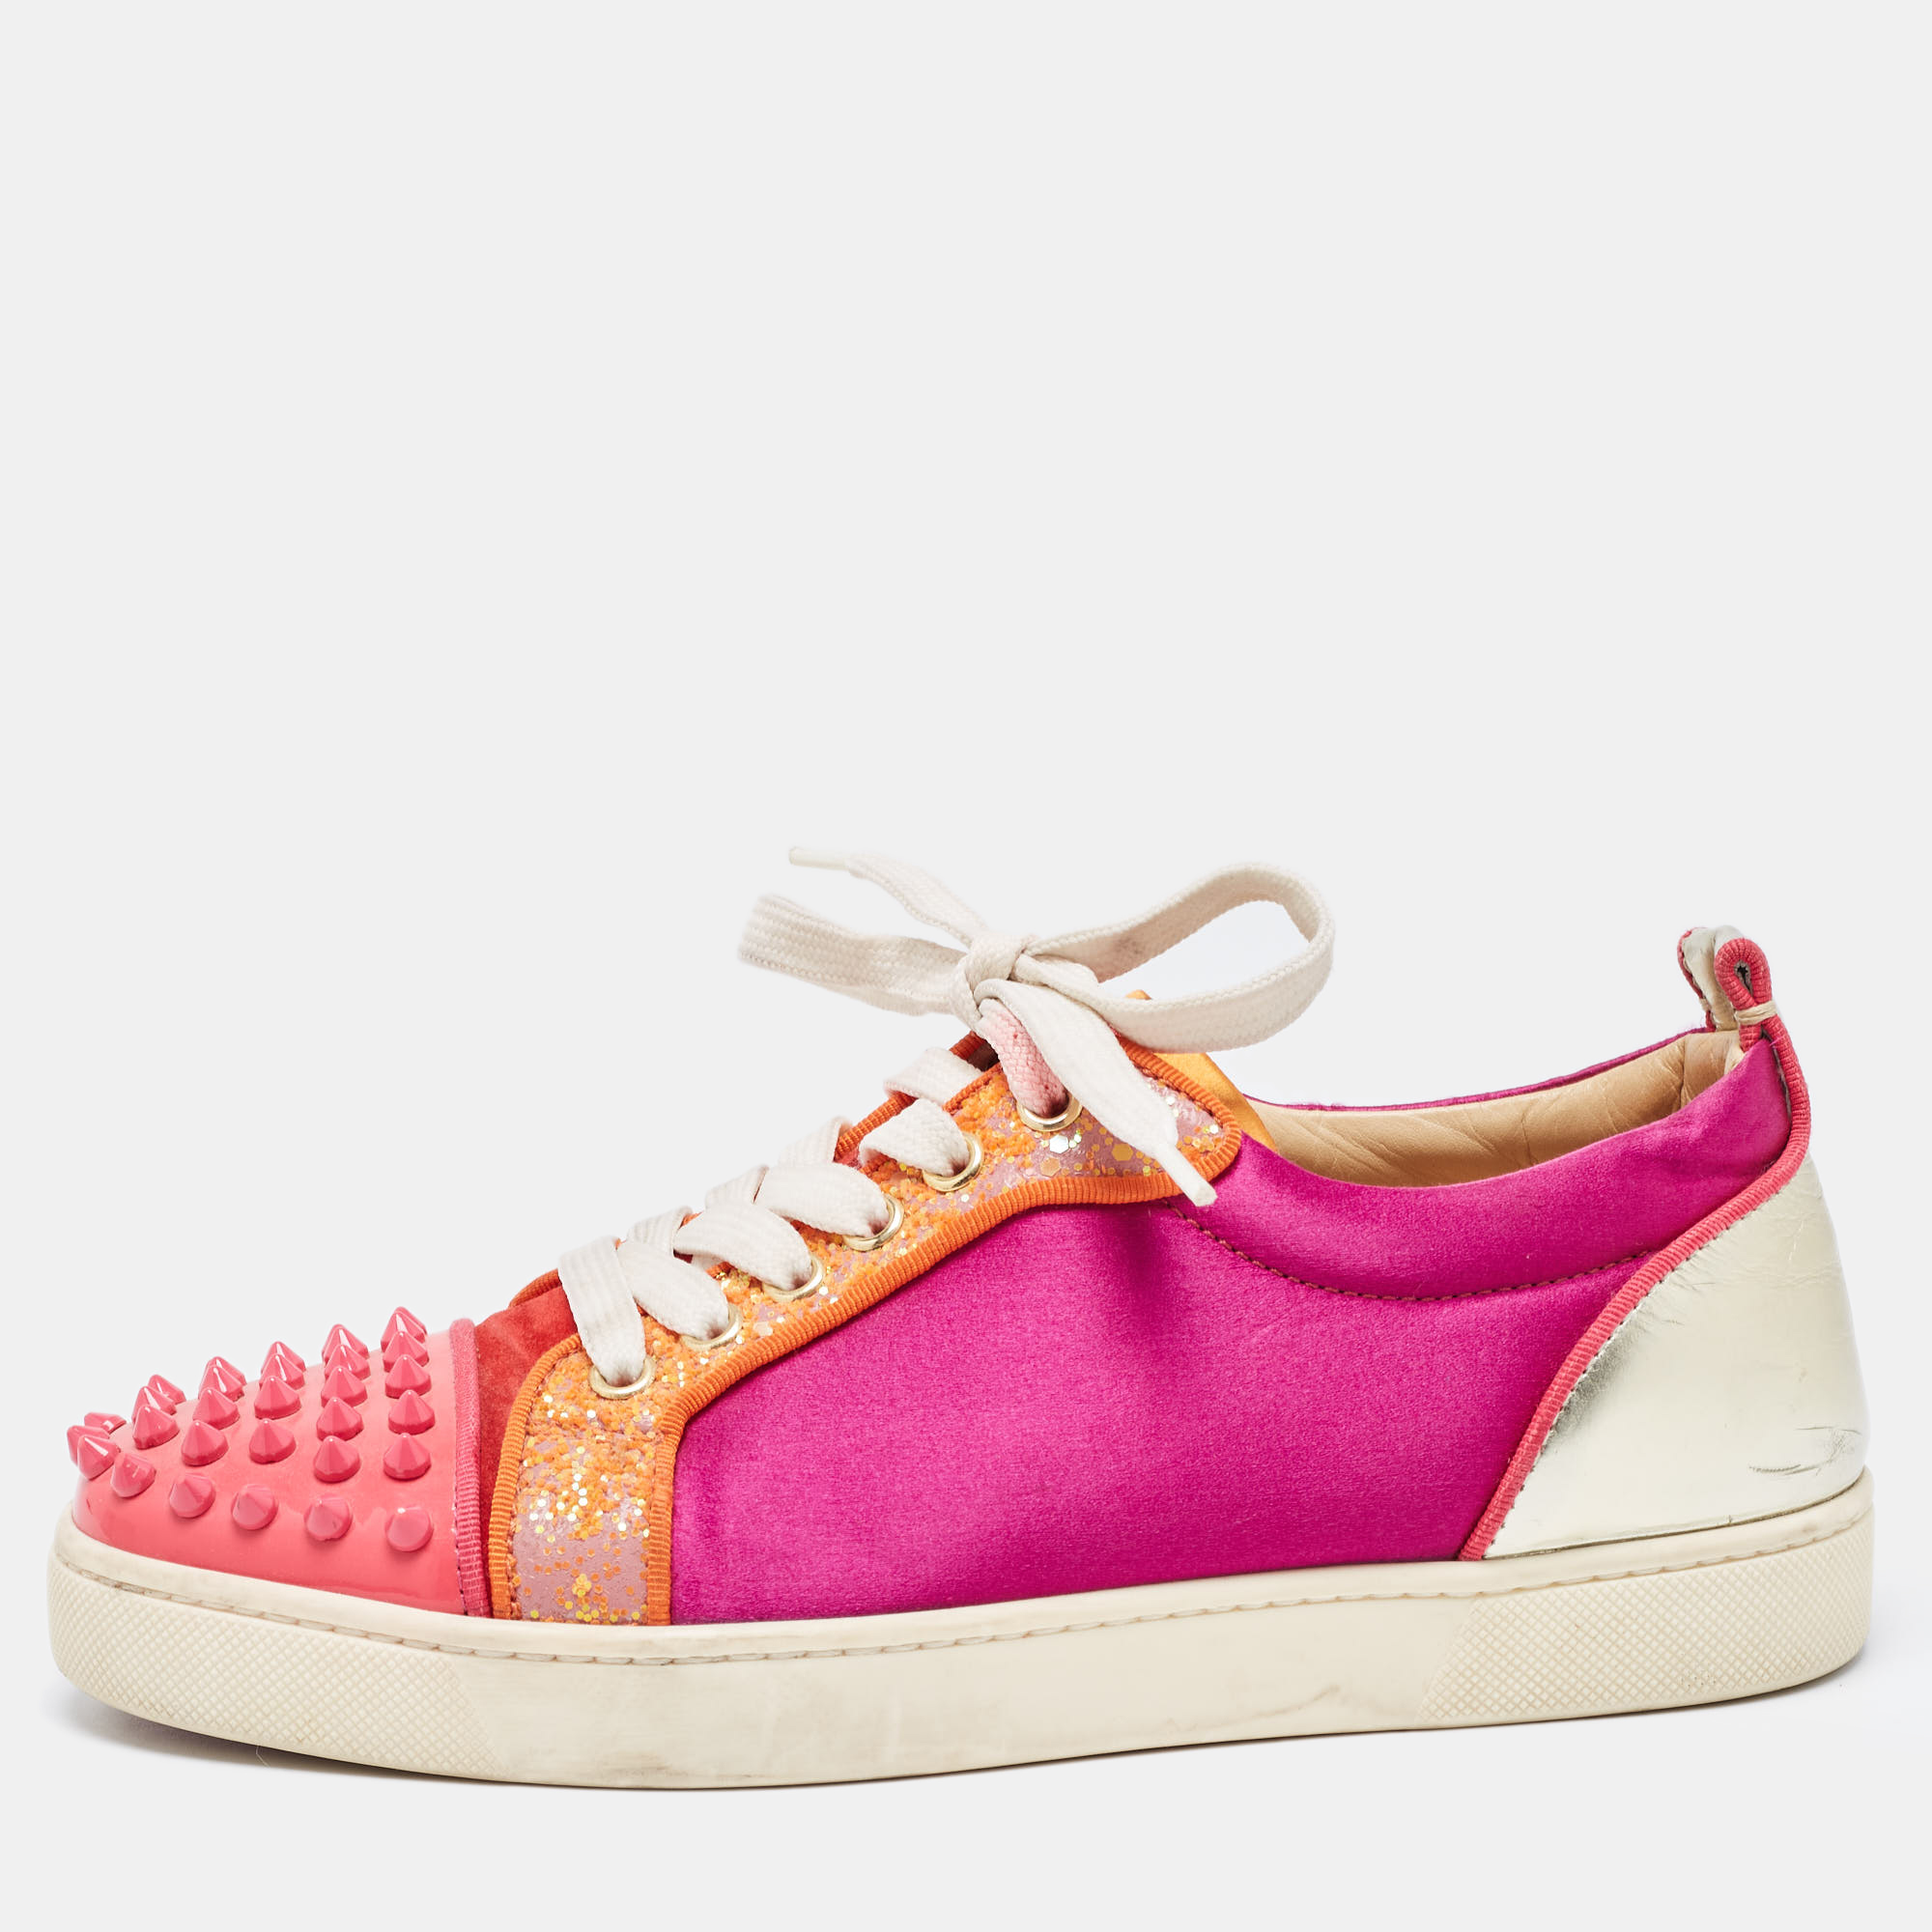 

Christian Louboutin Multicolor Satin And Leather Spikes Low Top Sneakers Size